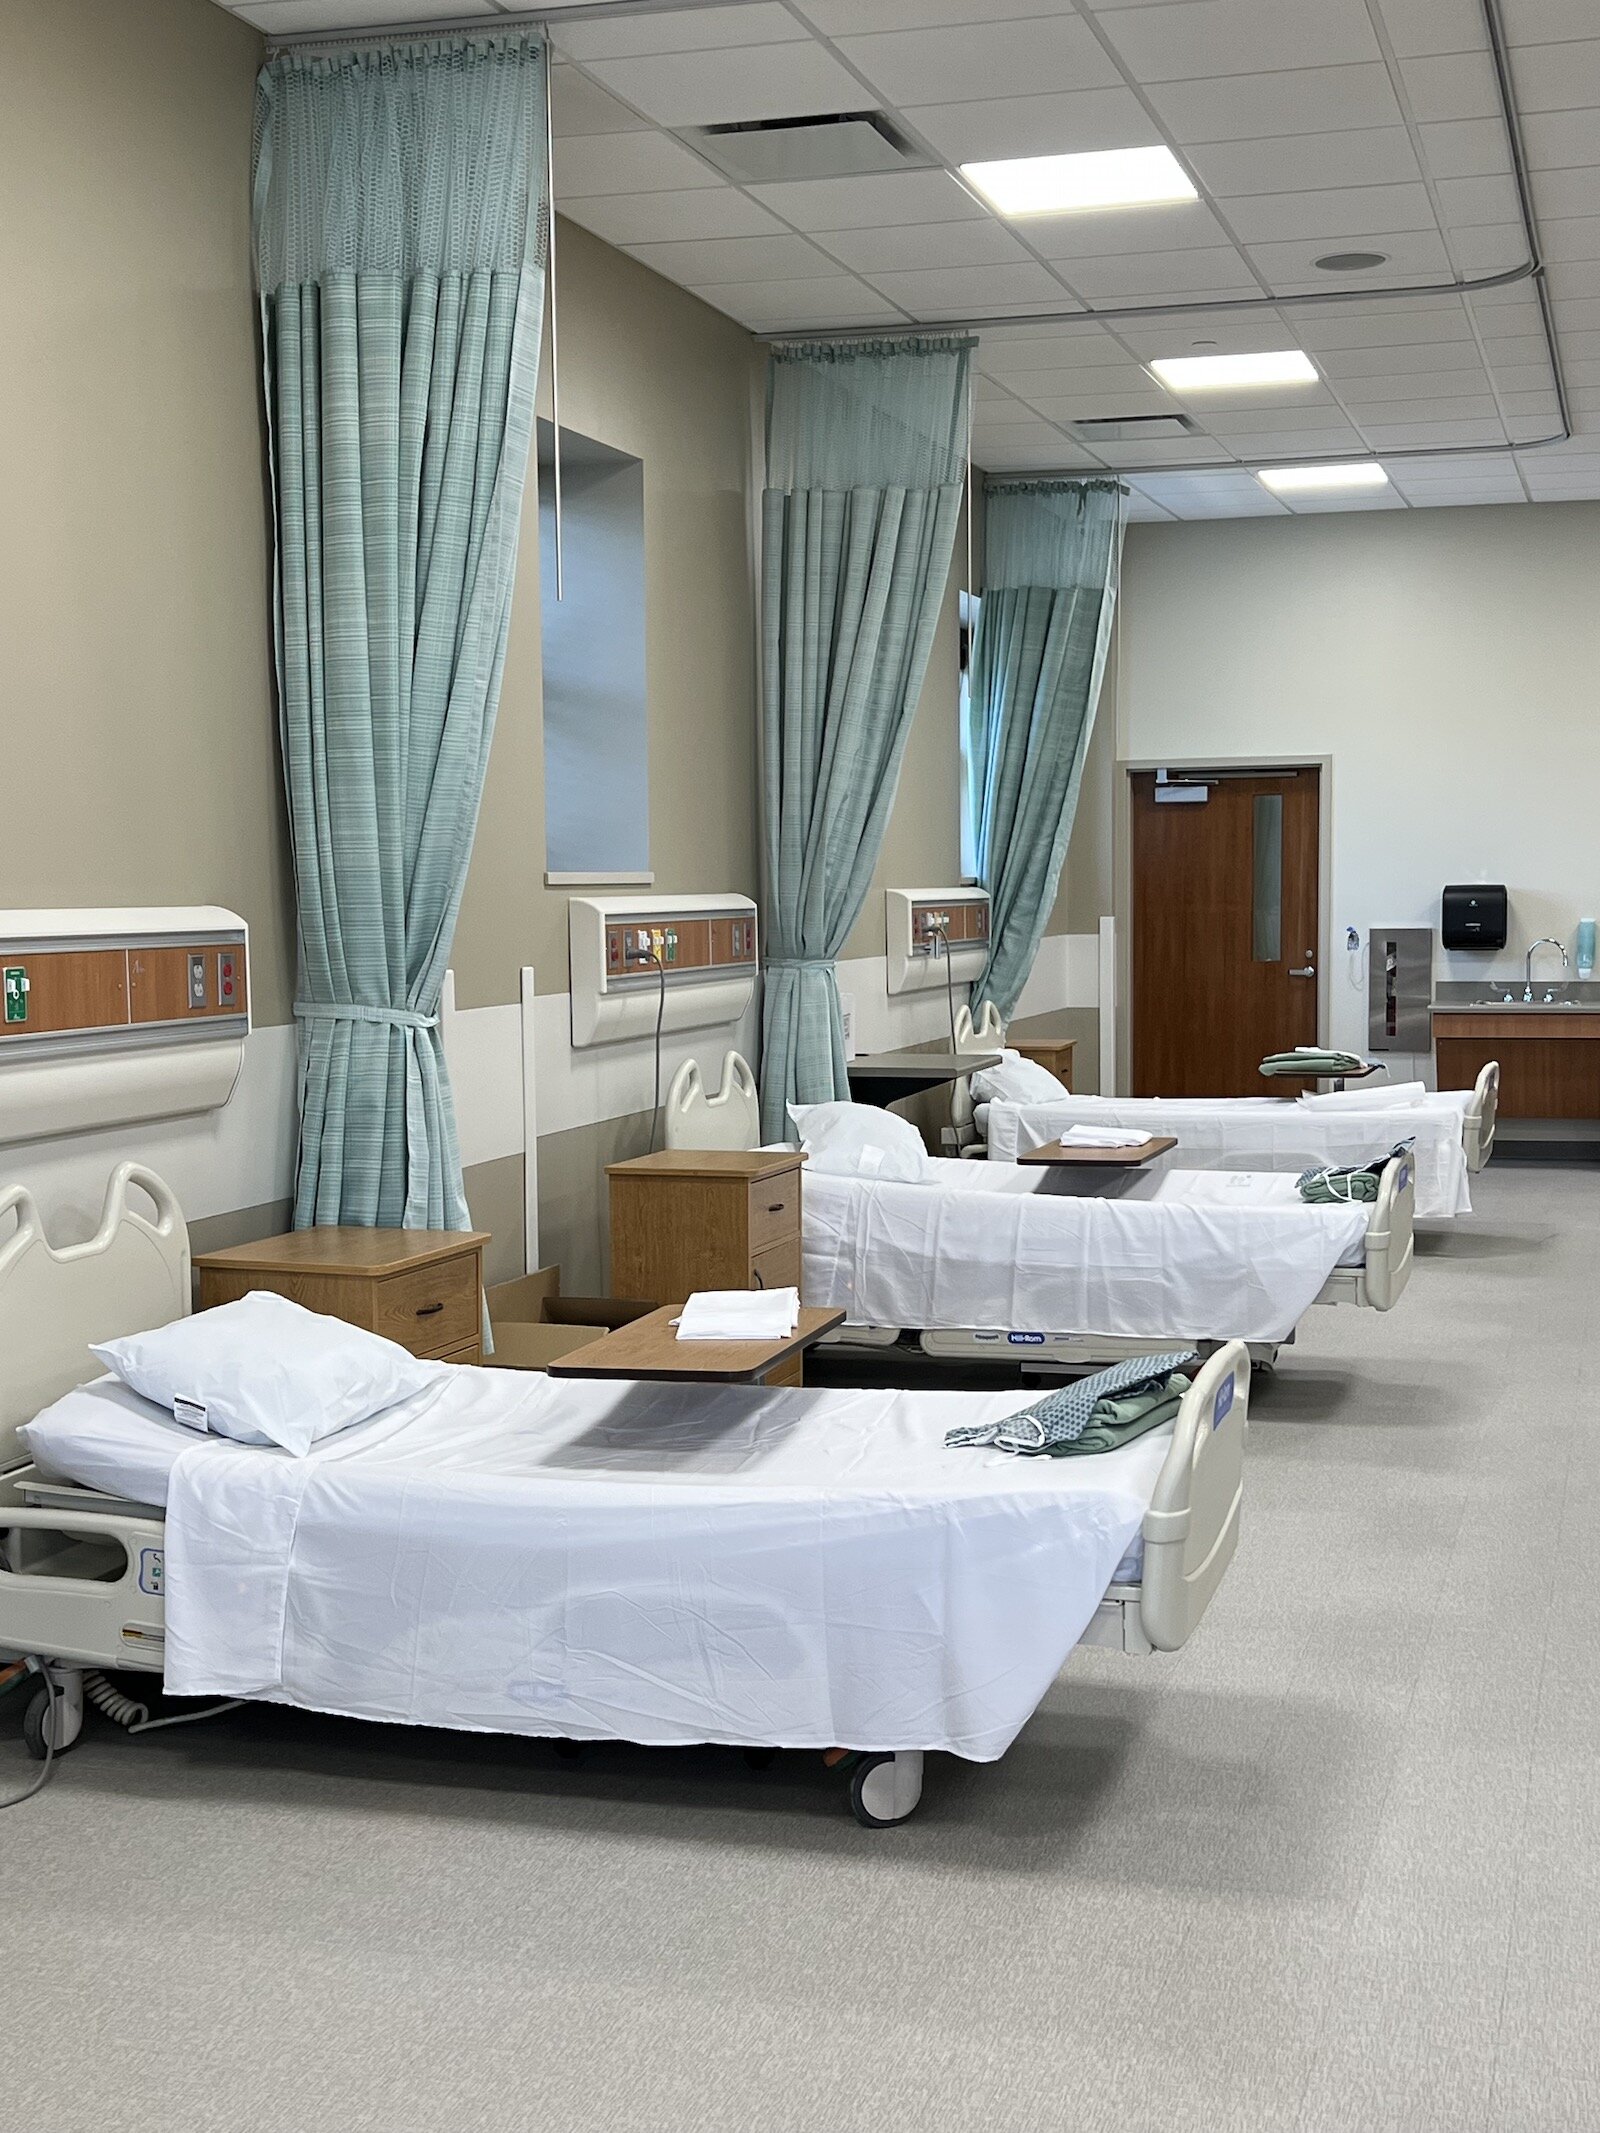 Indiana Tech's new, state-of-the-art nursing lab in Keene Building.